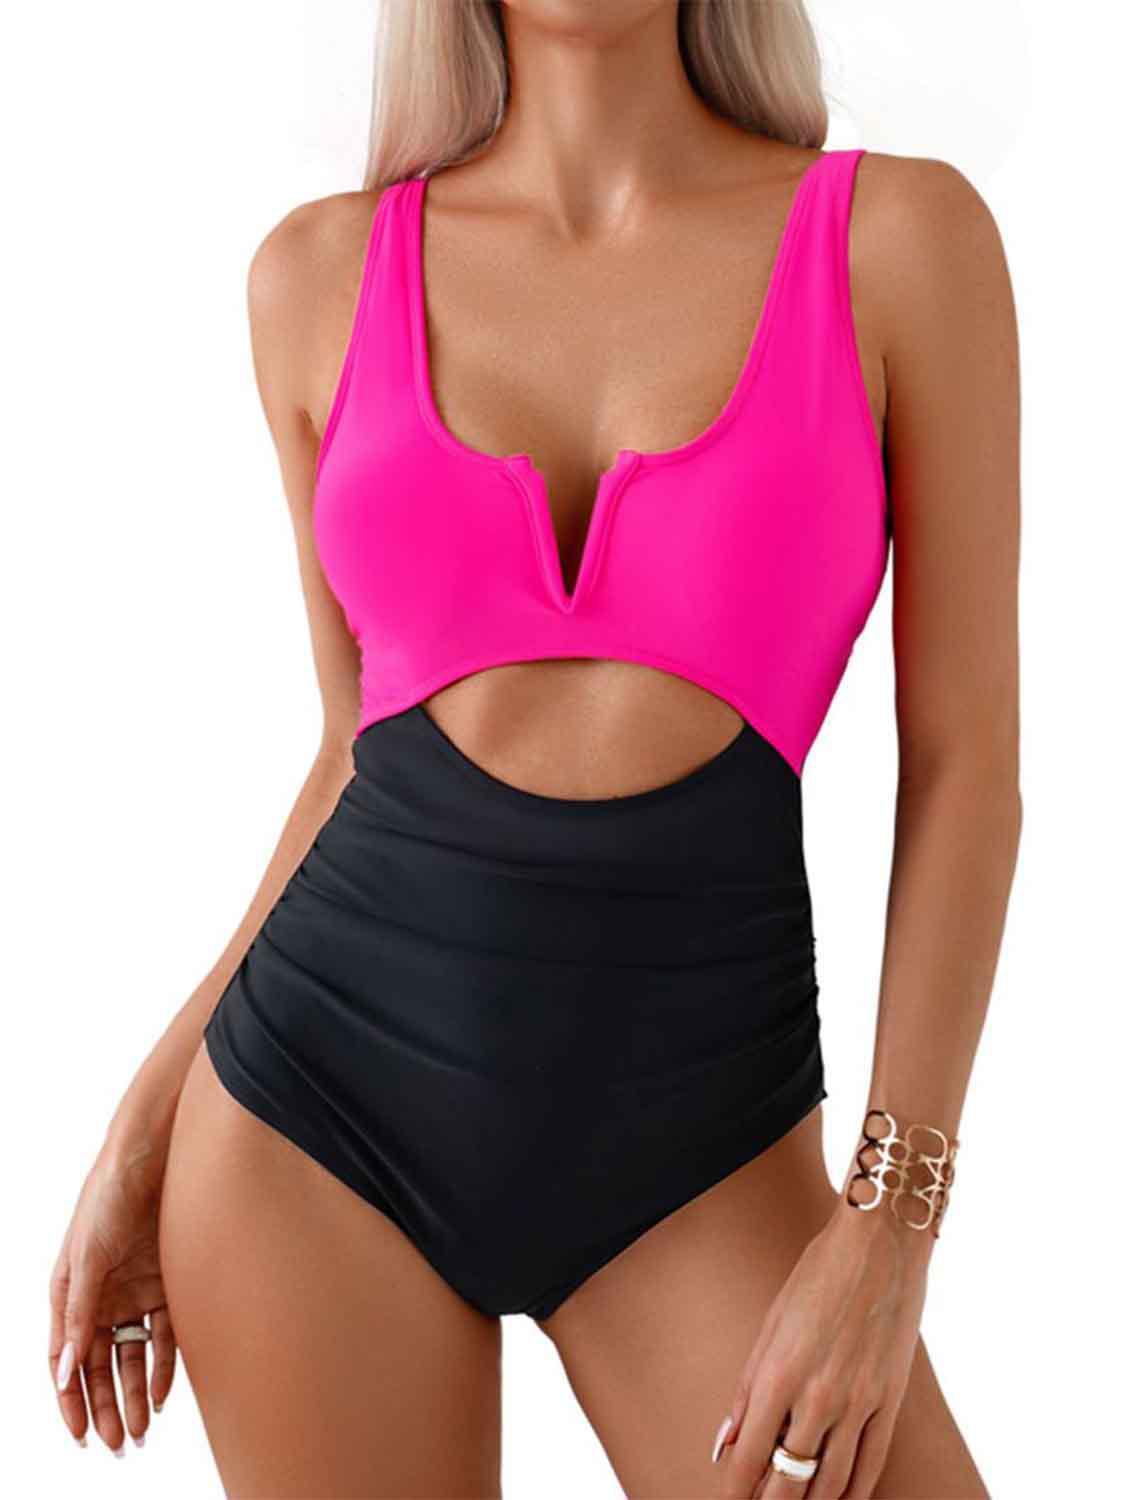 a woman in a pink and black swimsuit